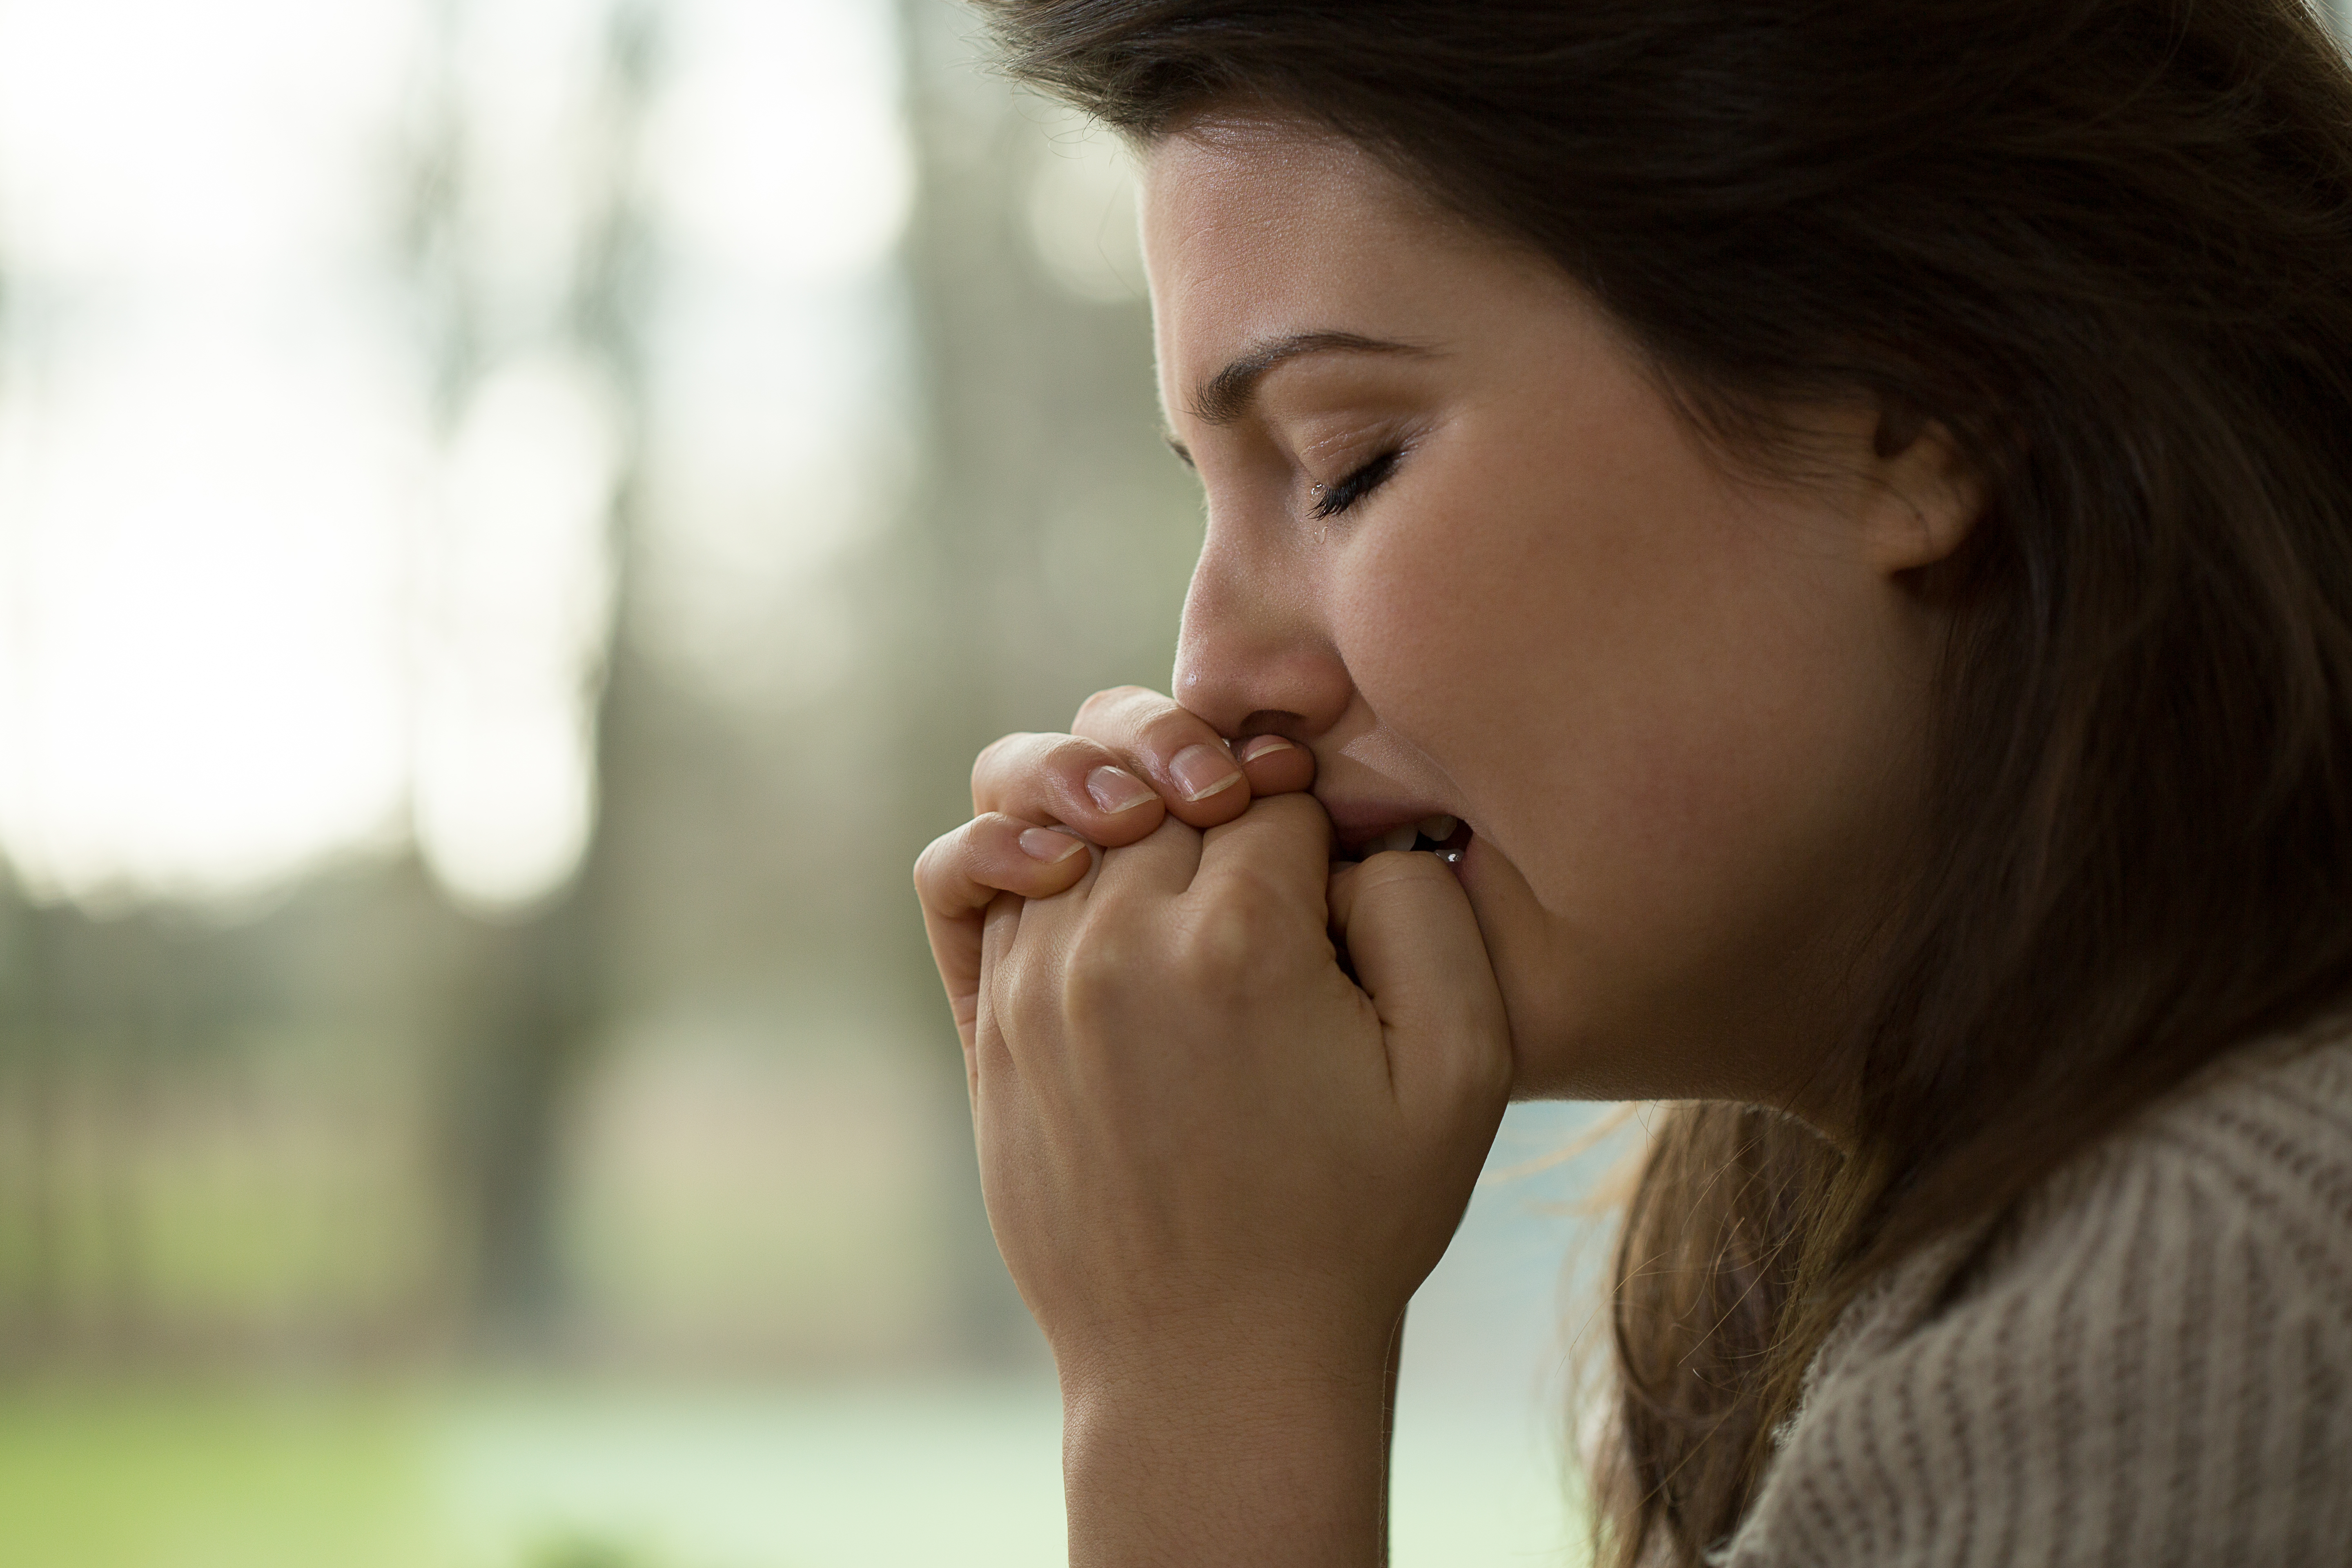 Crying young women with a nervous breakdown | Source: Shutterstock.com